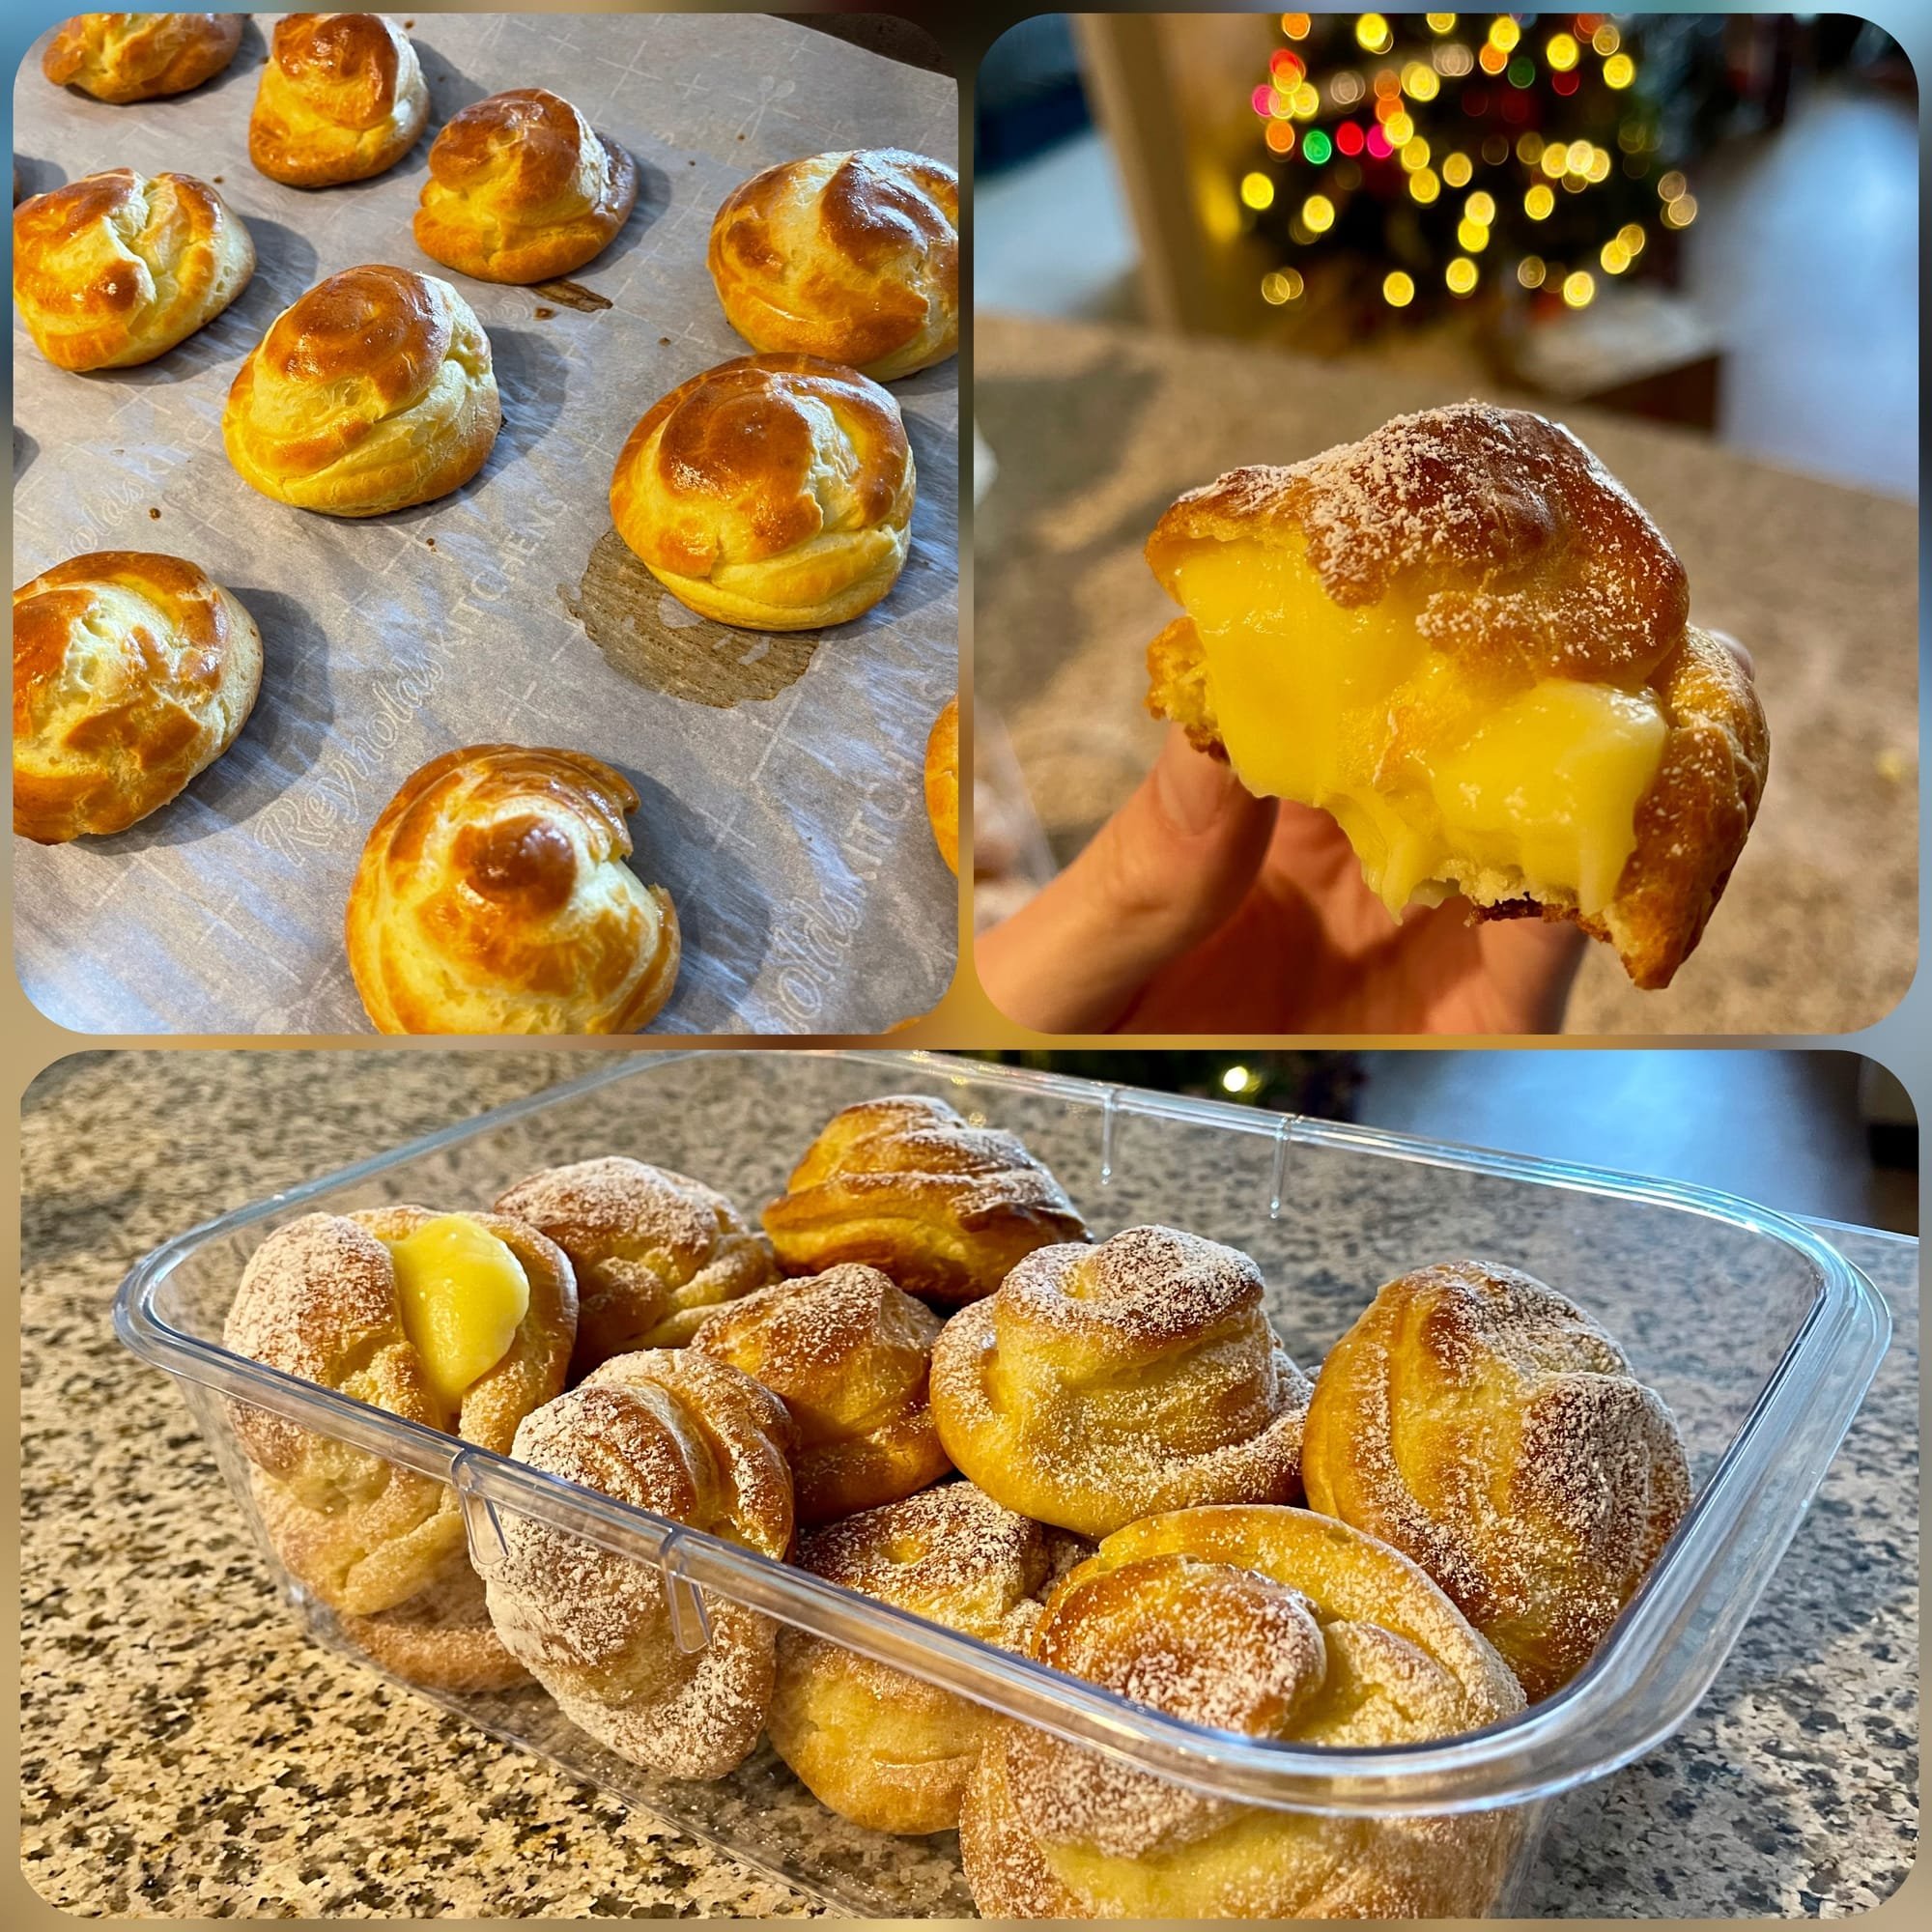 Christmas creampuffs - by Dr. Harris